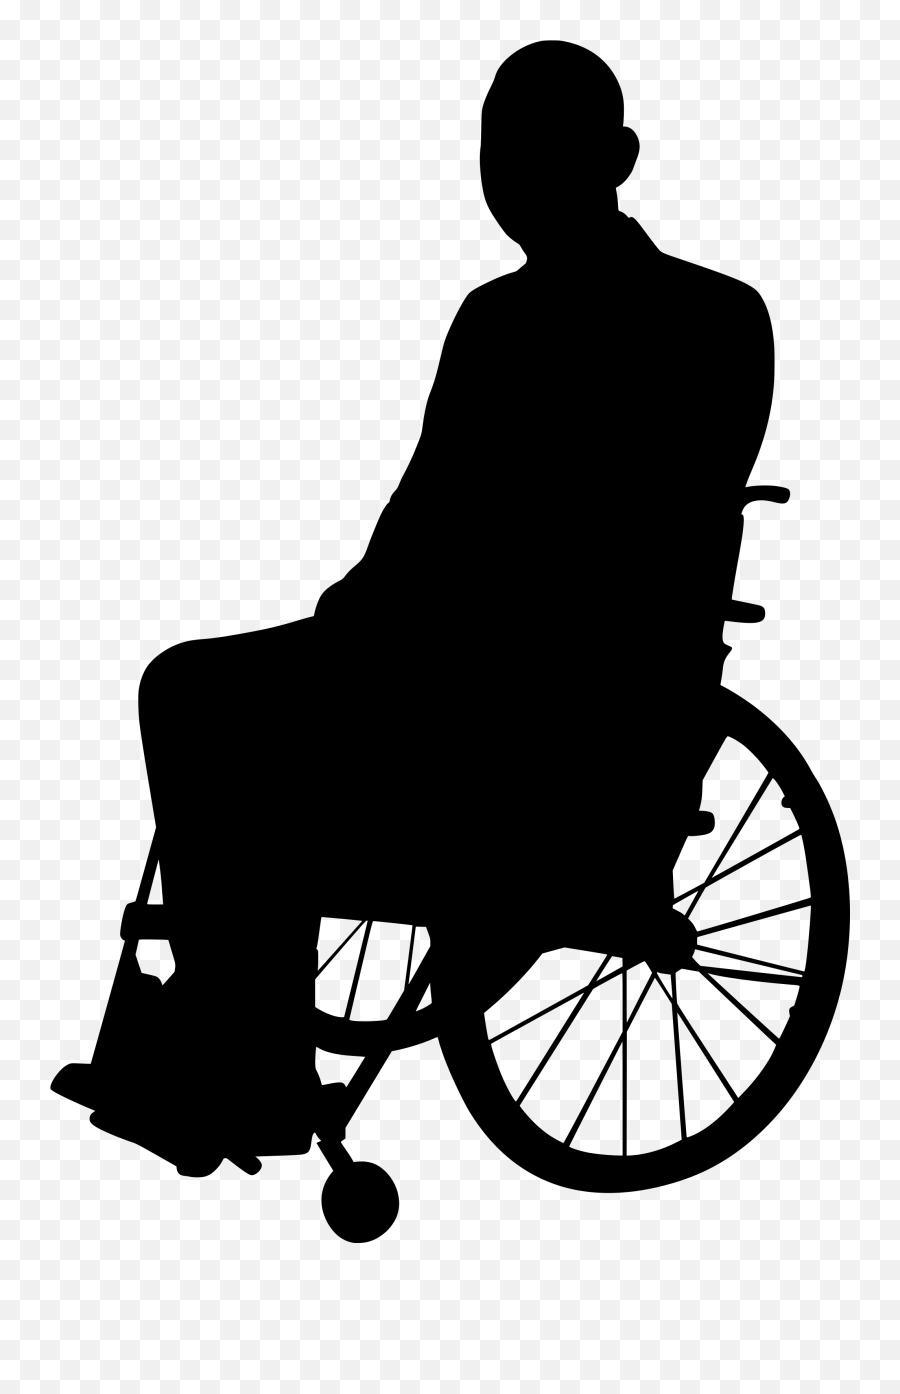 Disabled Symbol Png Images Free Download - Person In Wheelchair ...